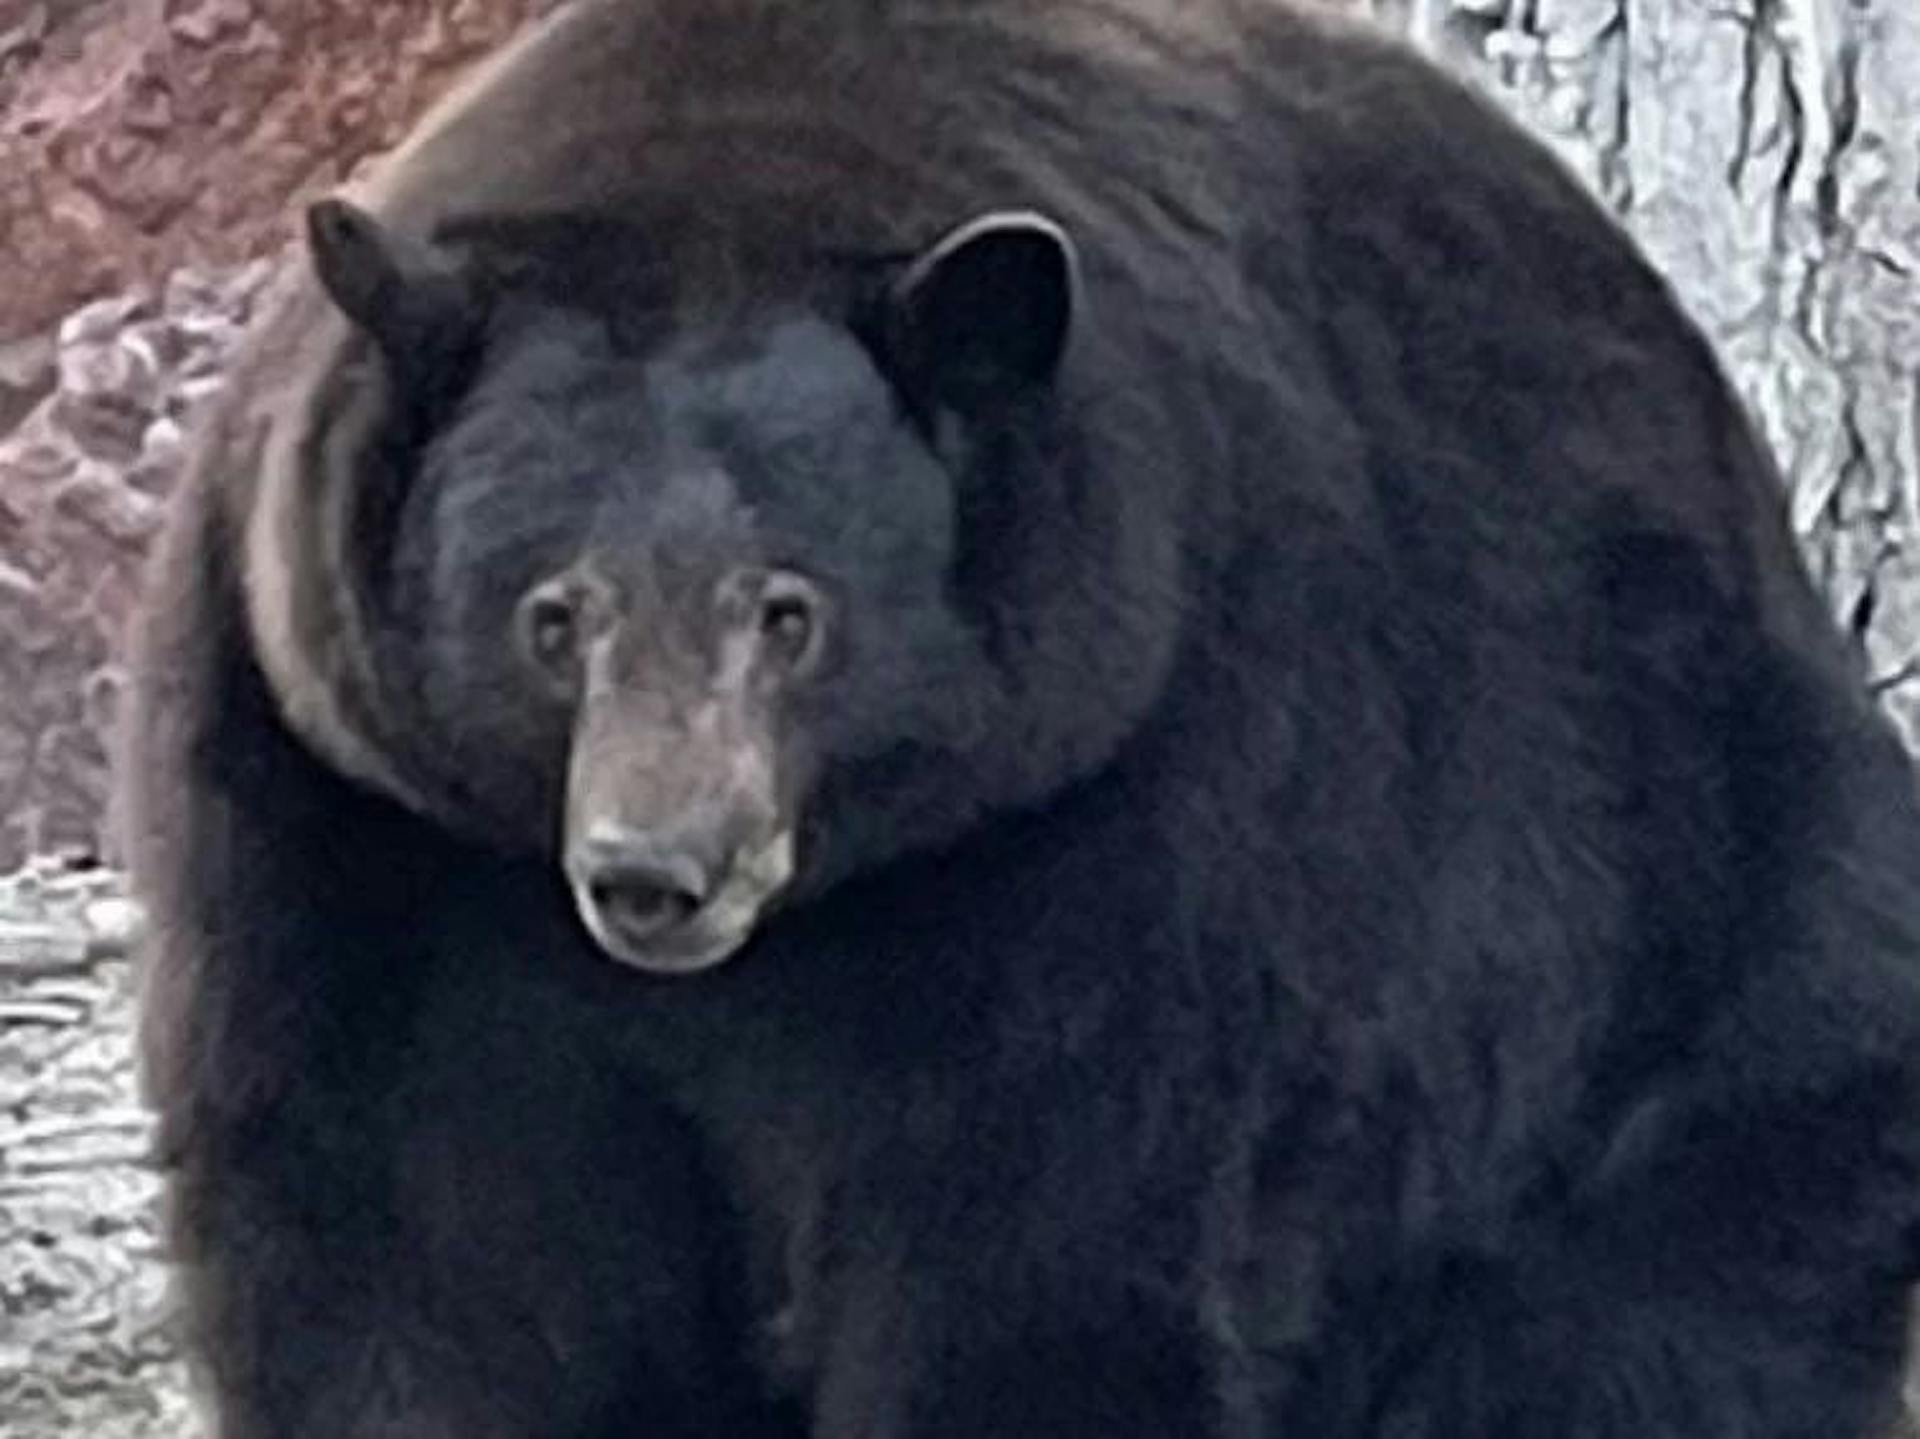 featured image - Hank the Tank: Should the Bear on the Run Be Adopted or Euthanized?